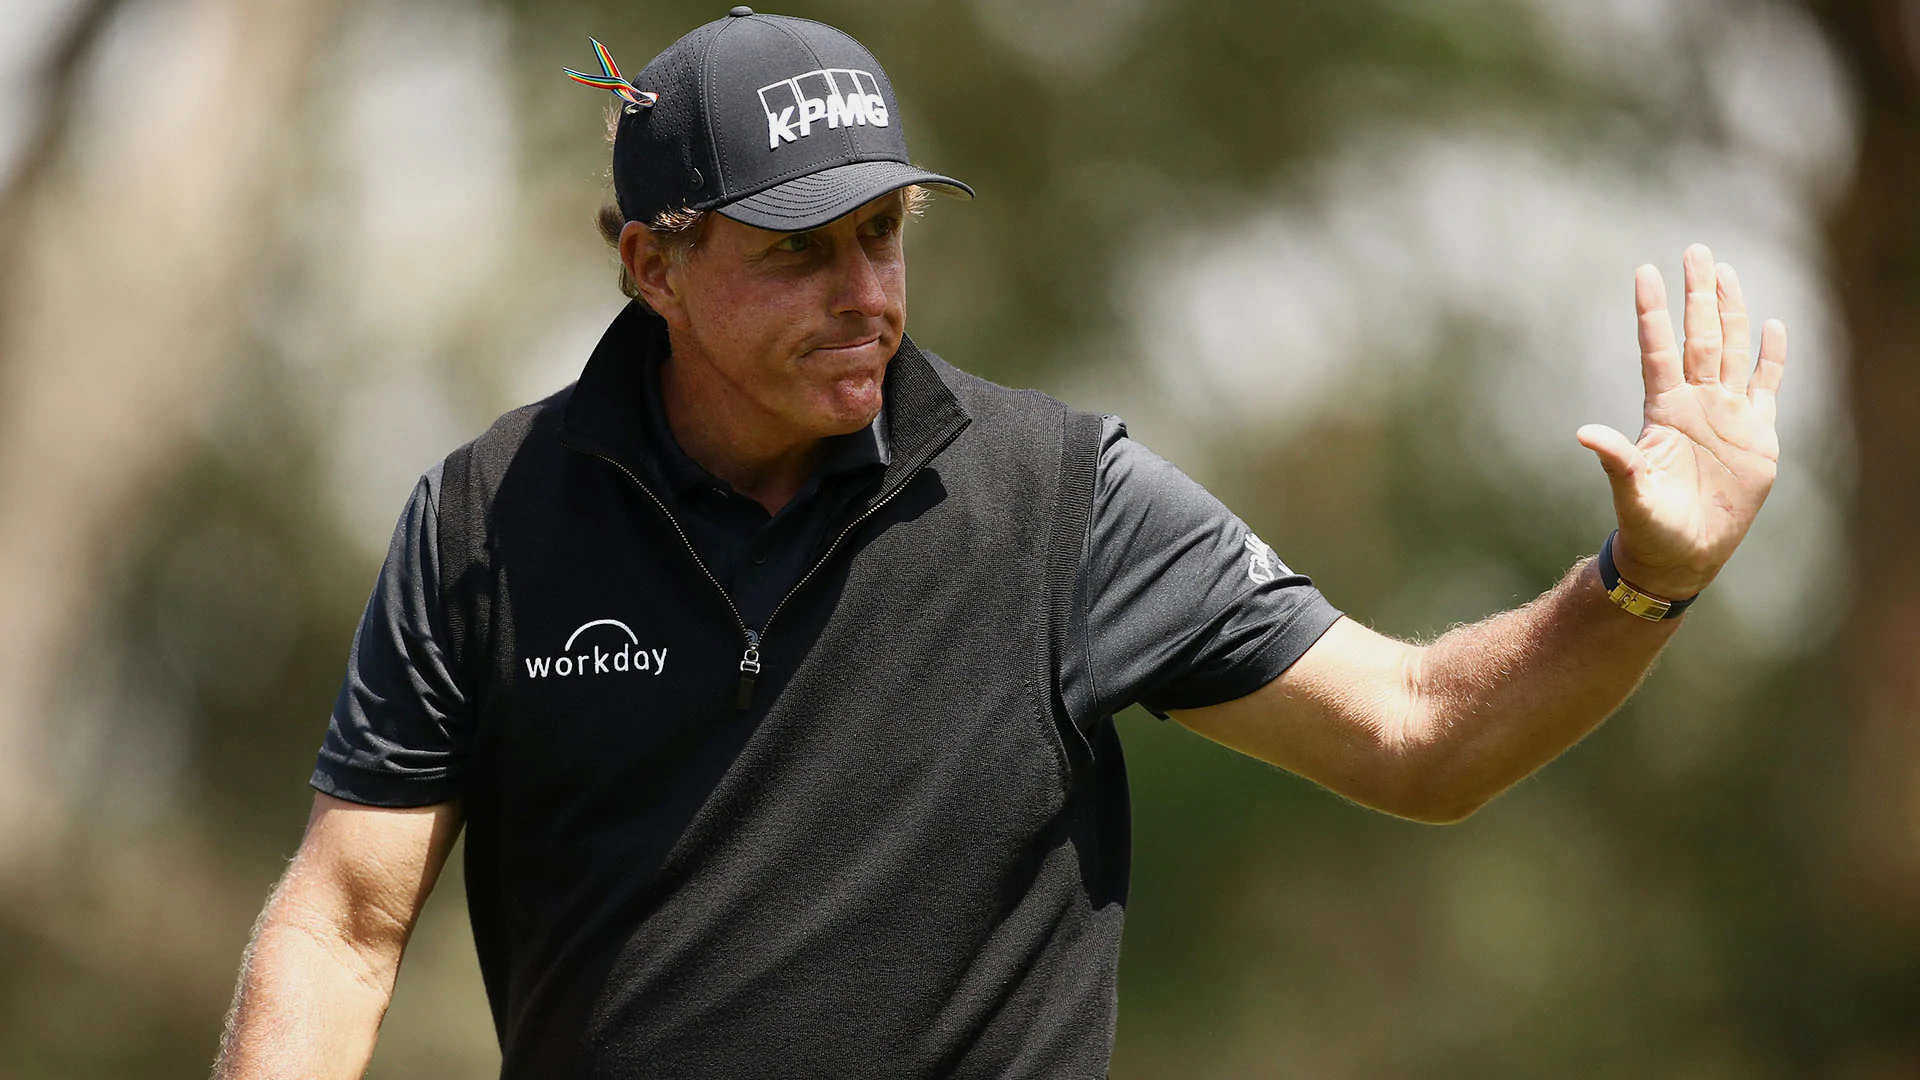 Foreshadowing Phil? Mickelson spent time with CBS in booth at PGA